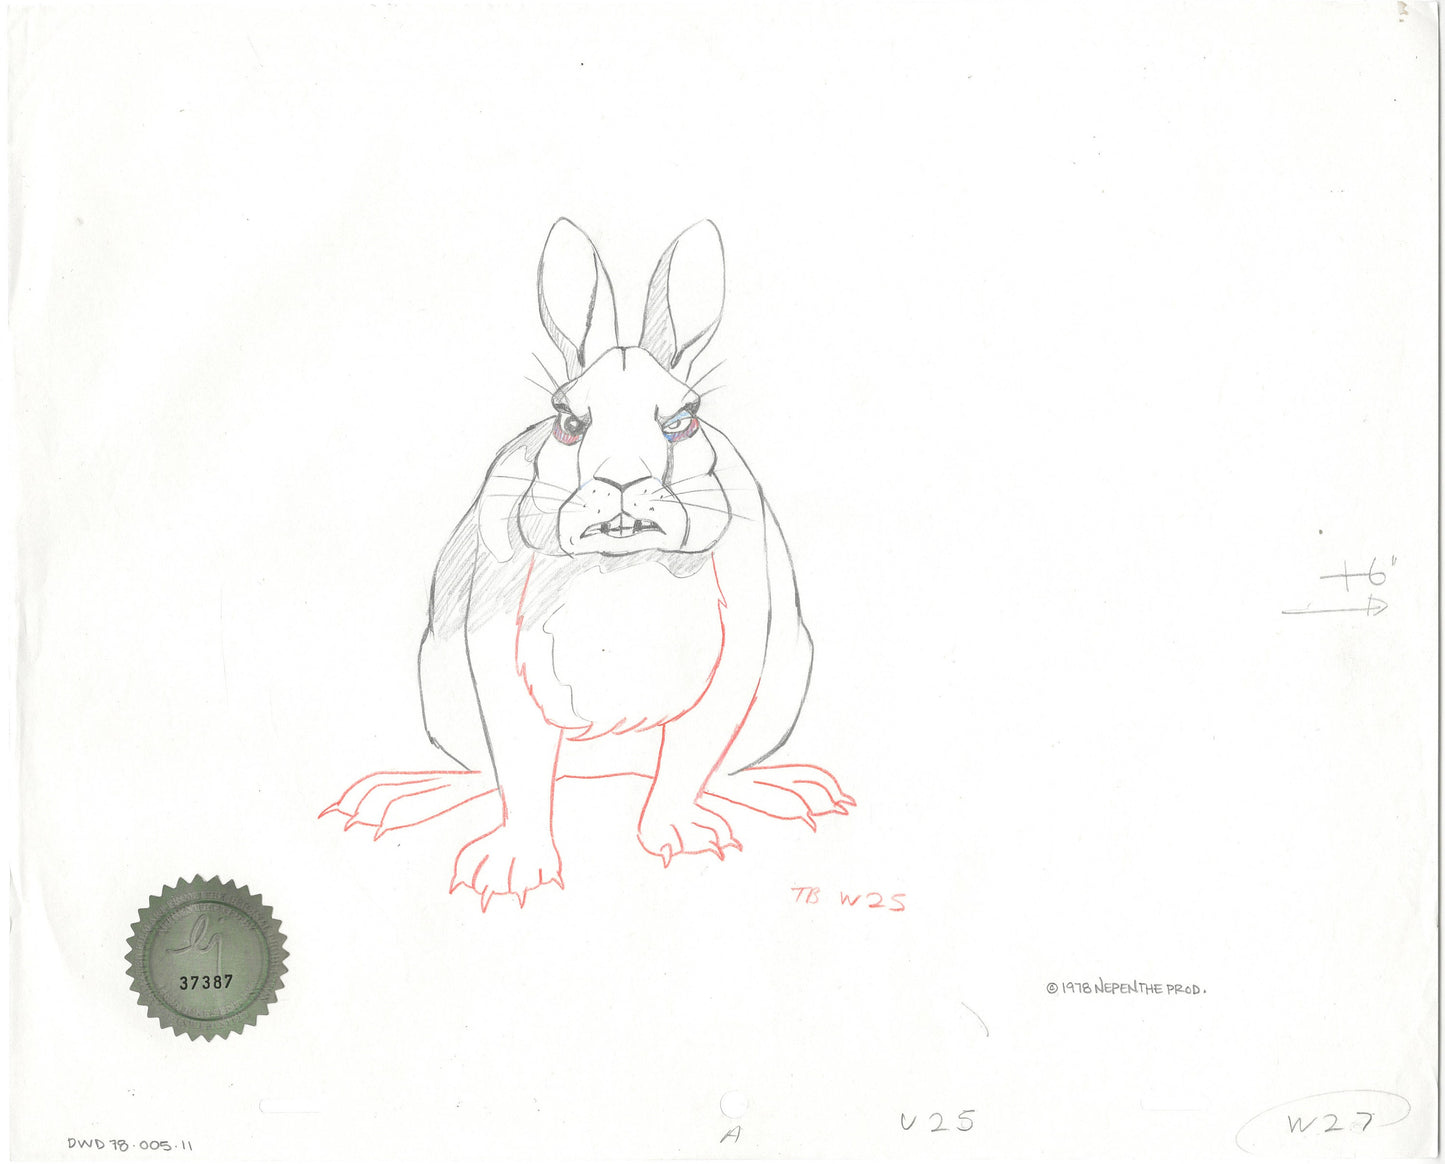 Watership Down 1978 Production Animation Cel Drawing of Woundort with Linda Jones Enterprise Seal and Certificate of Authenticity 005-011